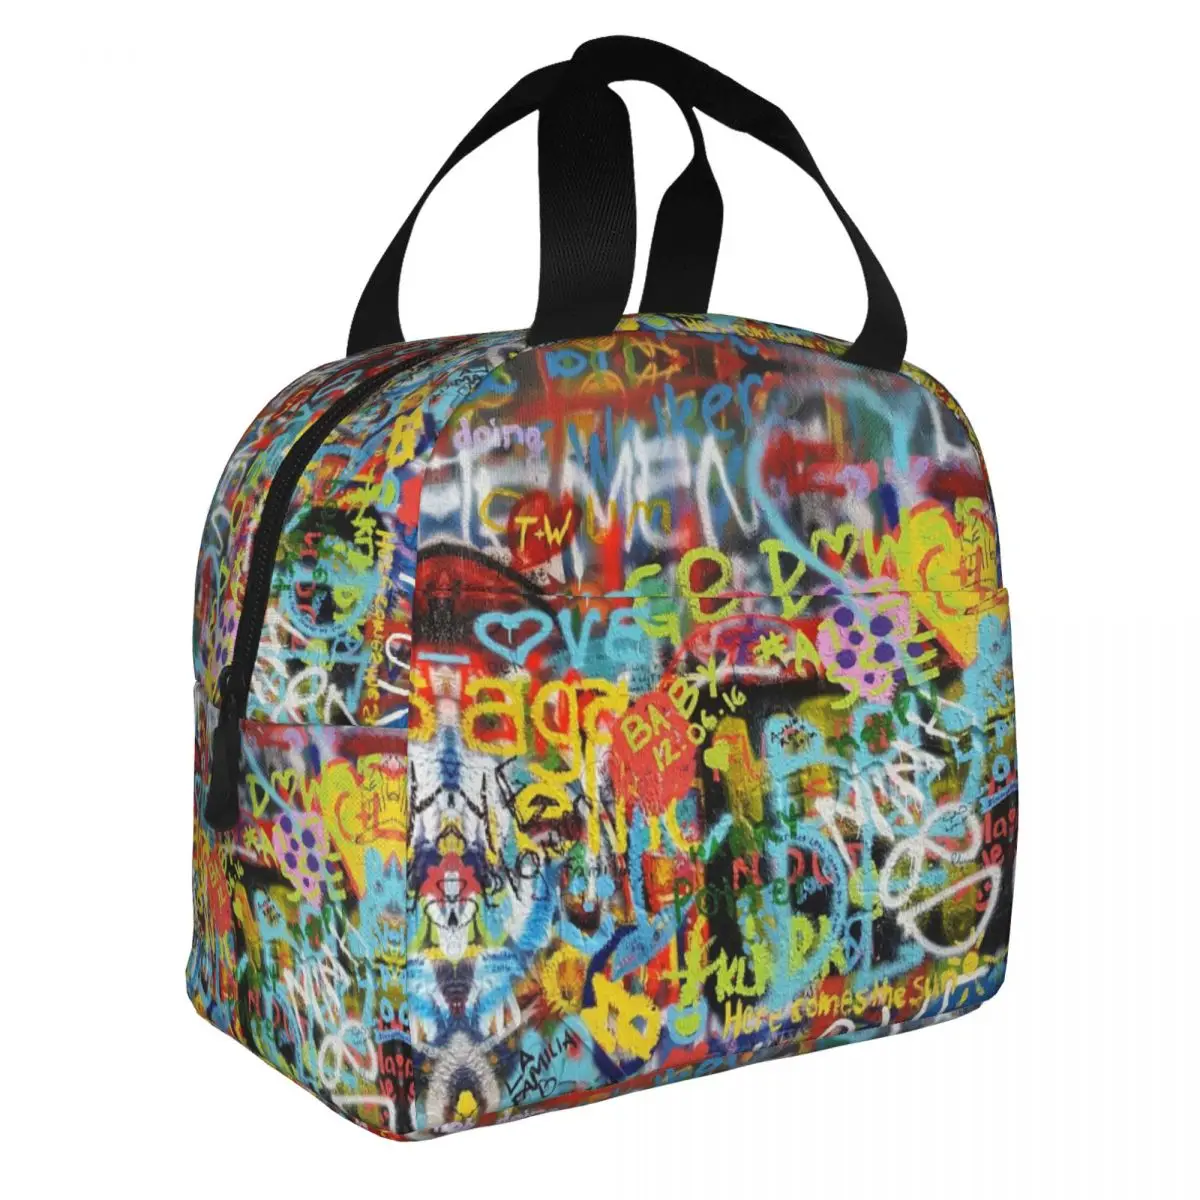 

Street Art Graffiti Insulated Lunch Bags Cooler Bag Reusable Banksy Stencil Spray Pop Art Large Tote Lunch Box Food Bag Travel